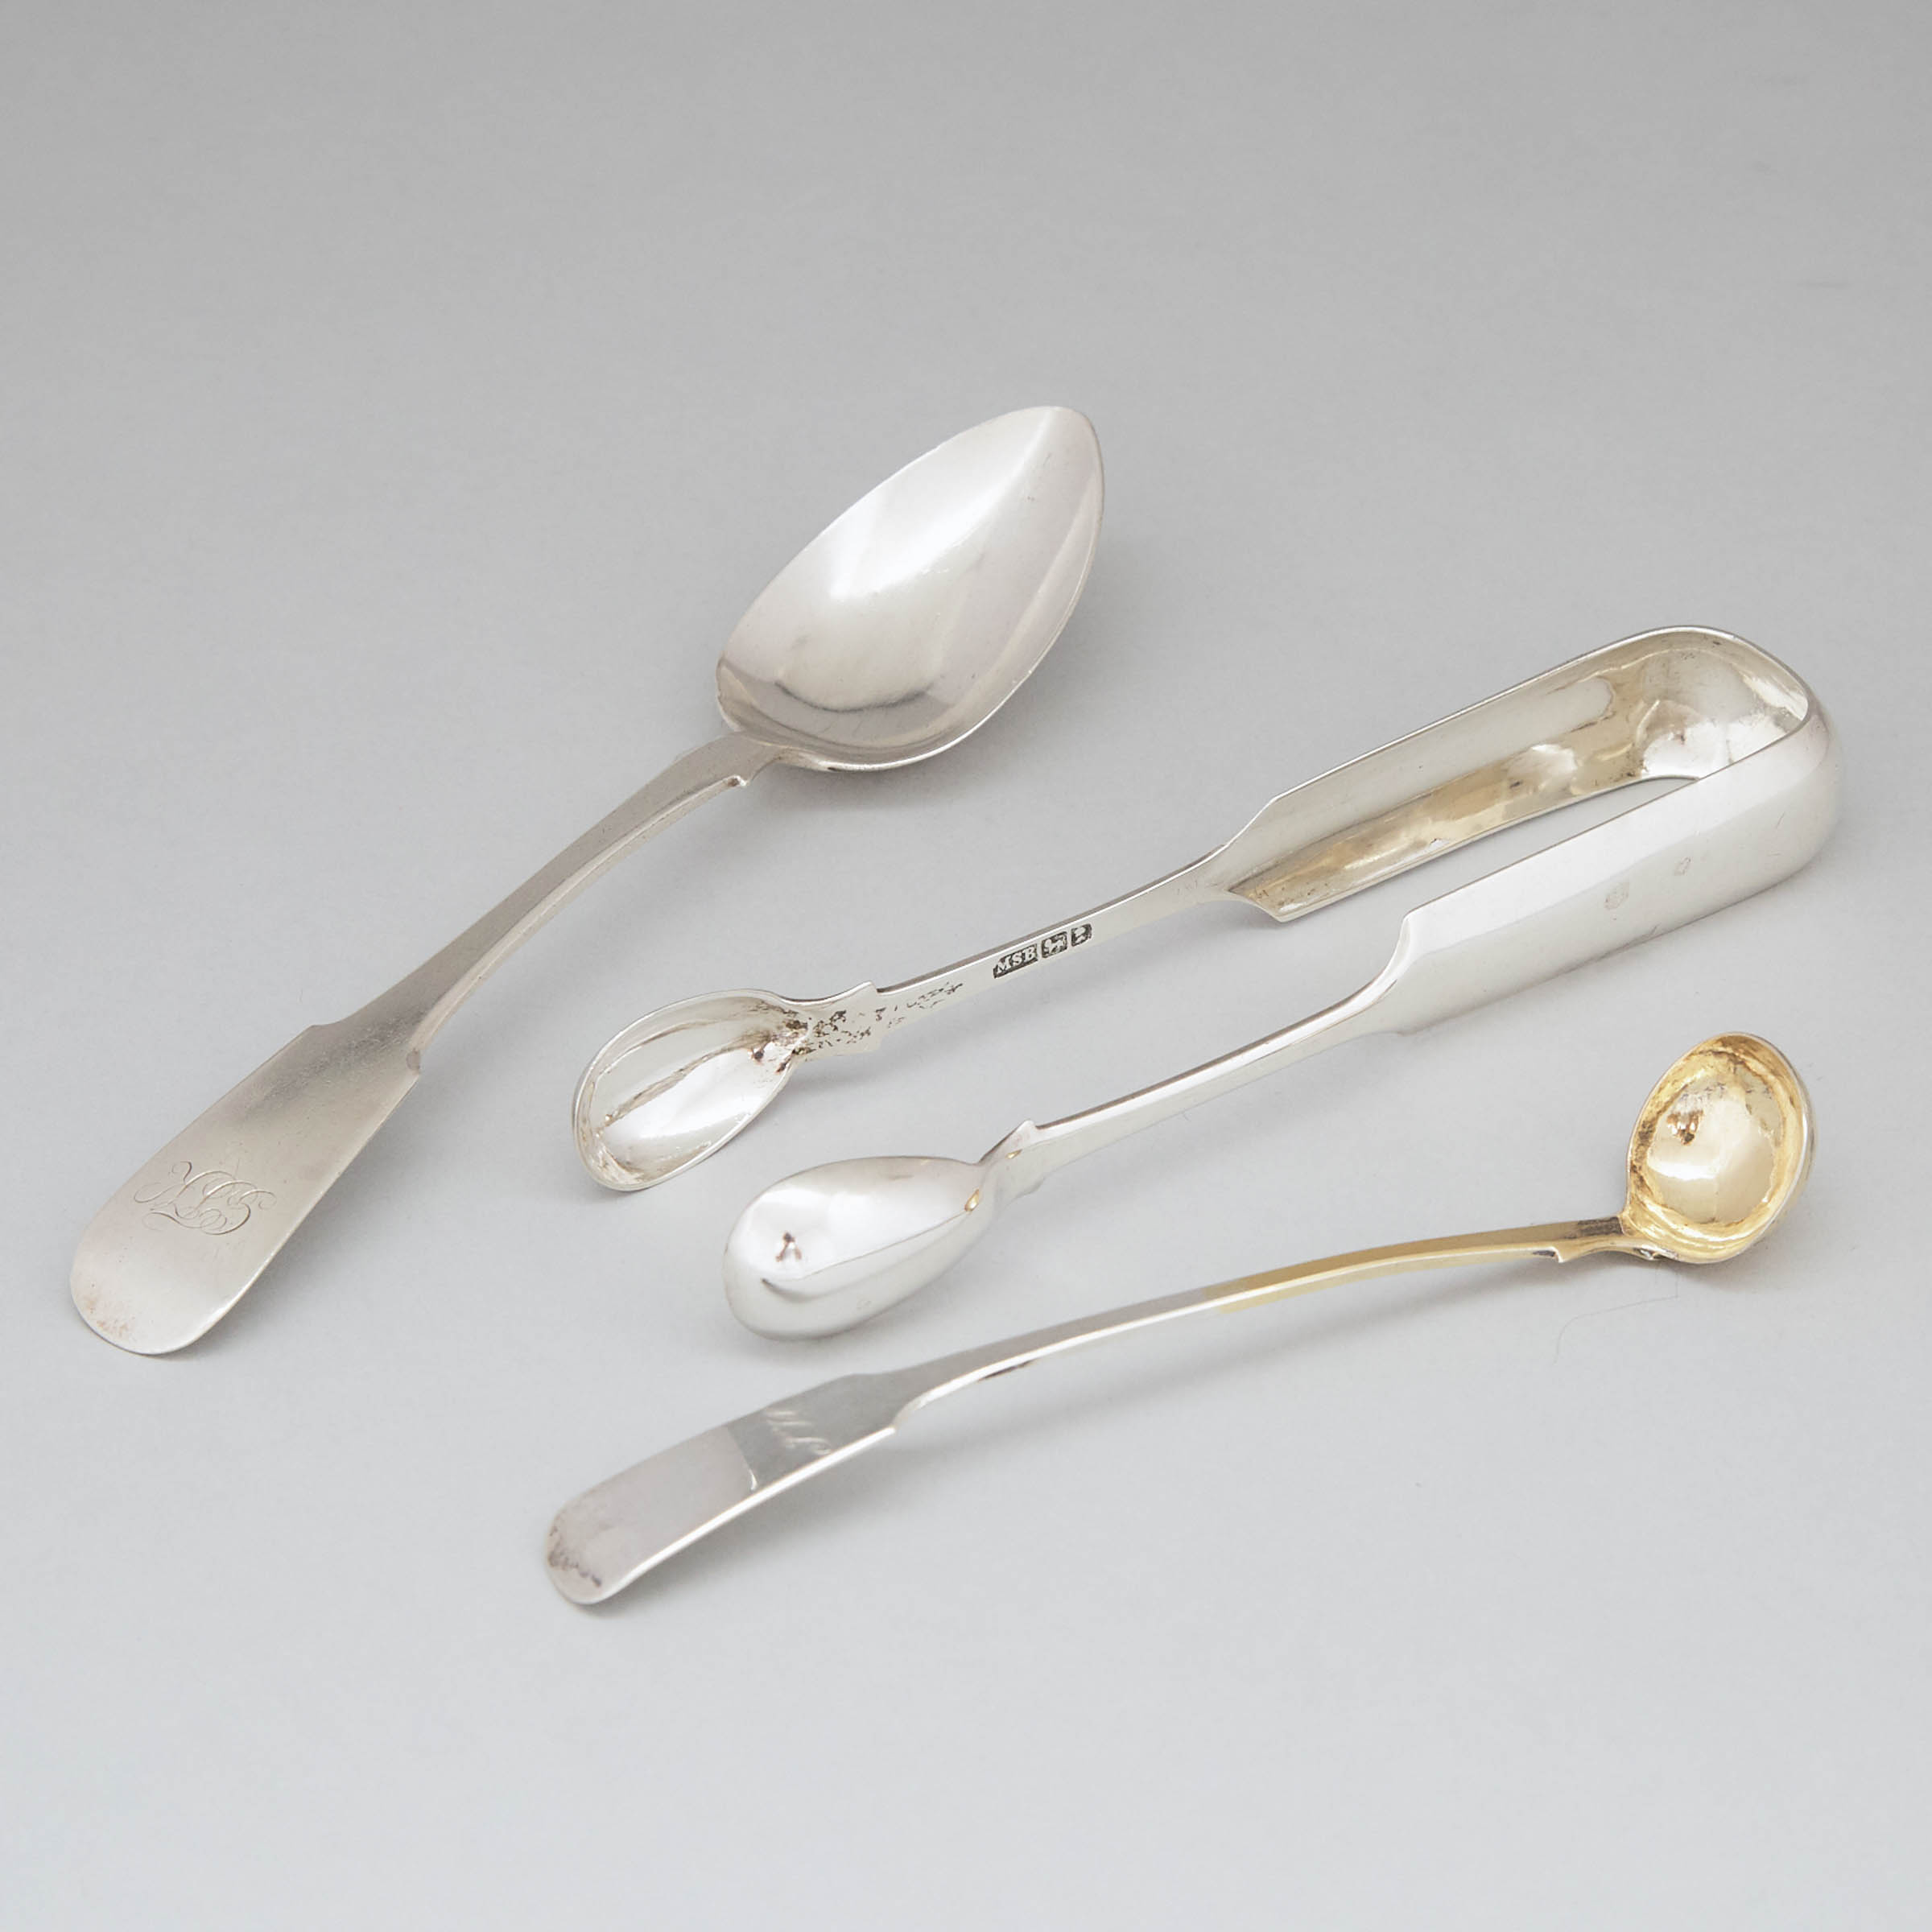 Canadian Silver Fiddle Pattern Sauce Ladle, George Savage, a Dessert Spoon, James Adams Dwight, Montreal, Que., and Sugar Tongs, Michael Septimus Brown, Halifax, N.S., 19th century